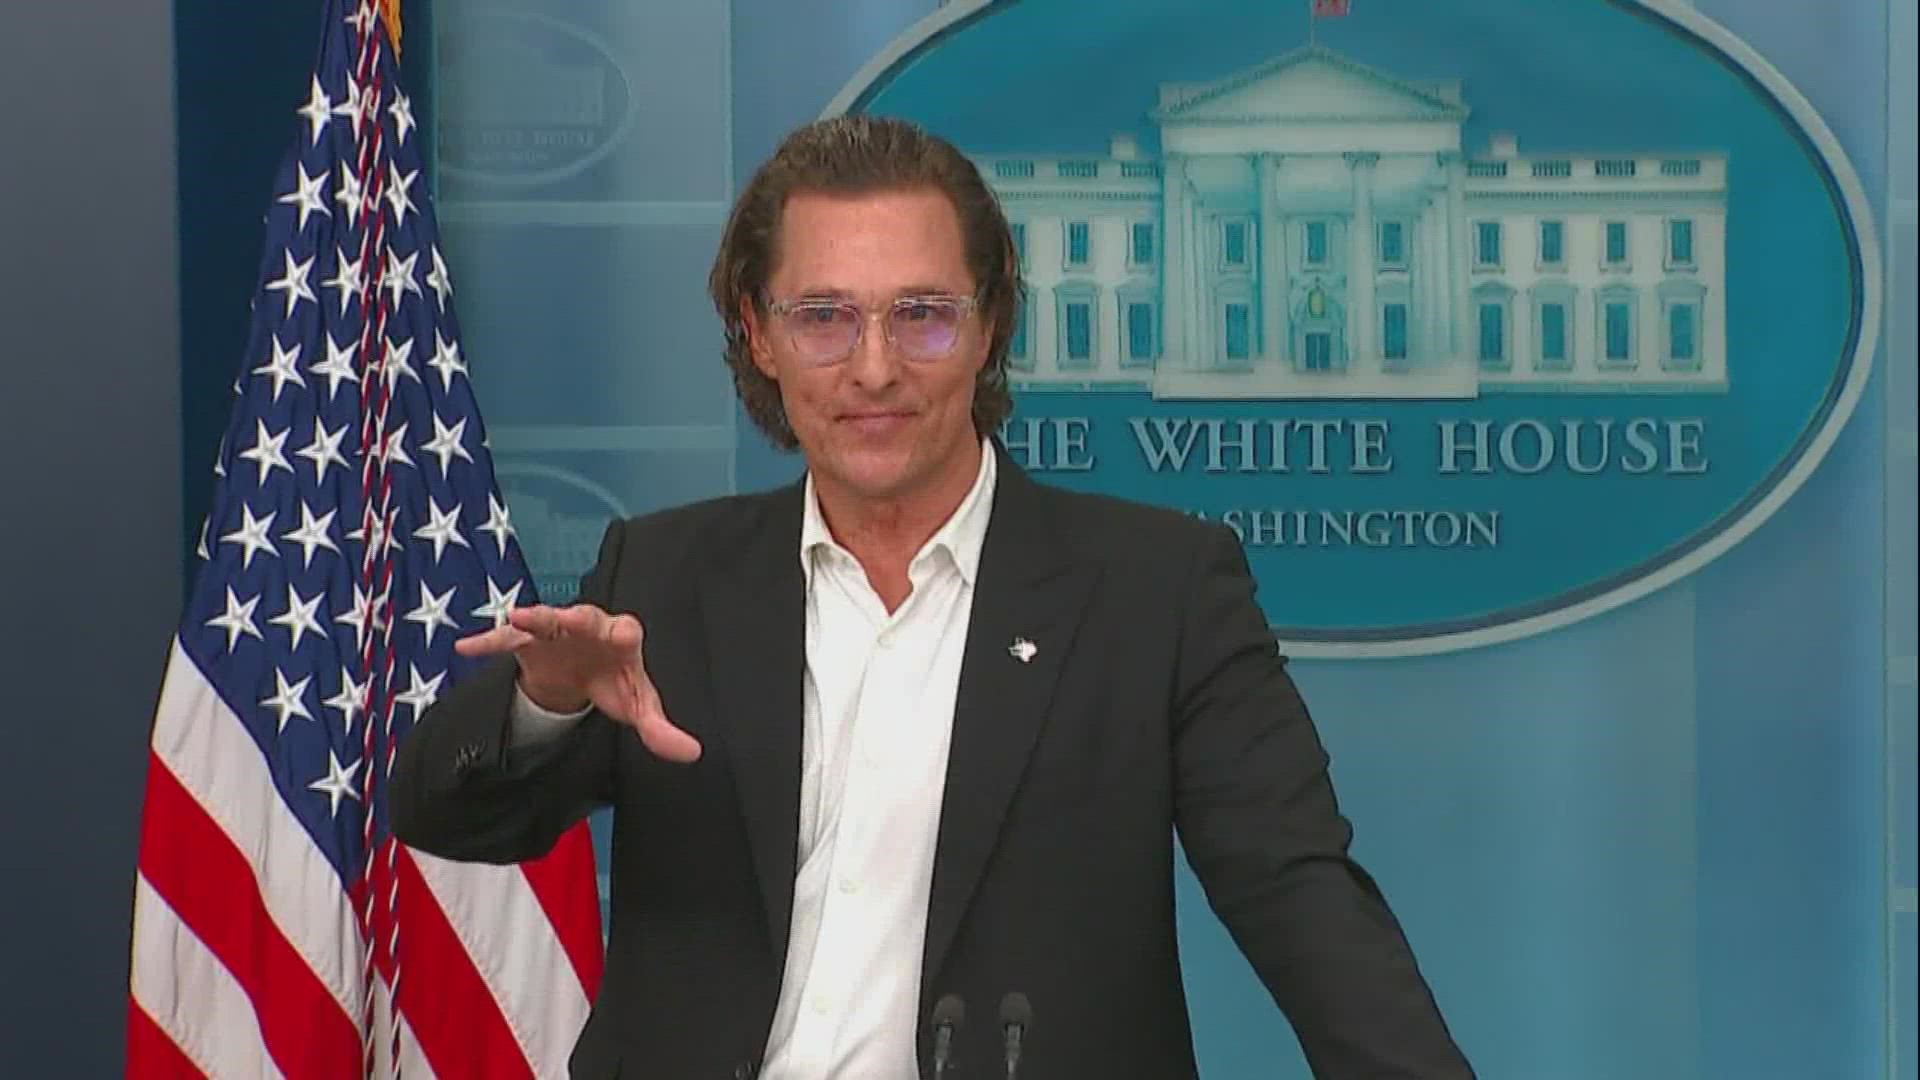 Matthew McConaughey was at the White House calling for stricter gun laws. He spoke about making the 21 lives lost in Uvalde matter.